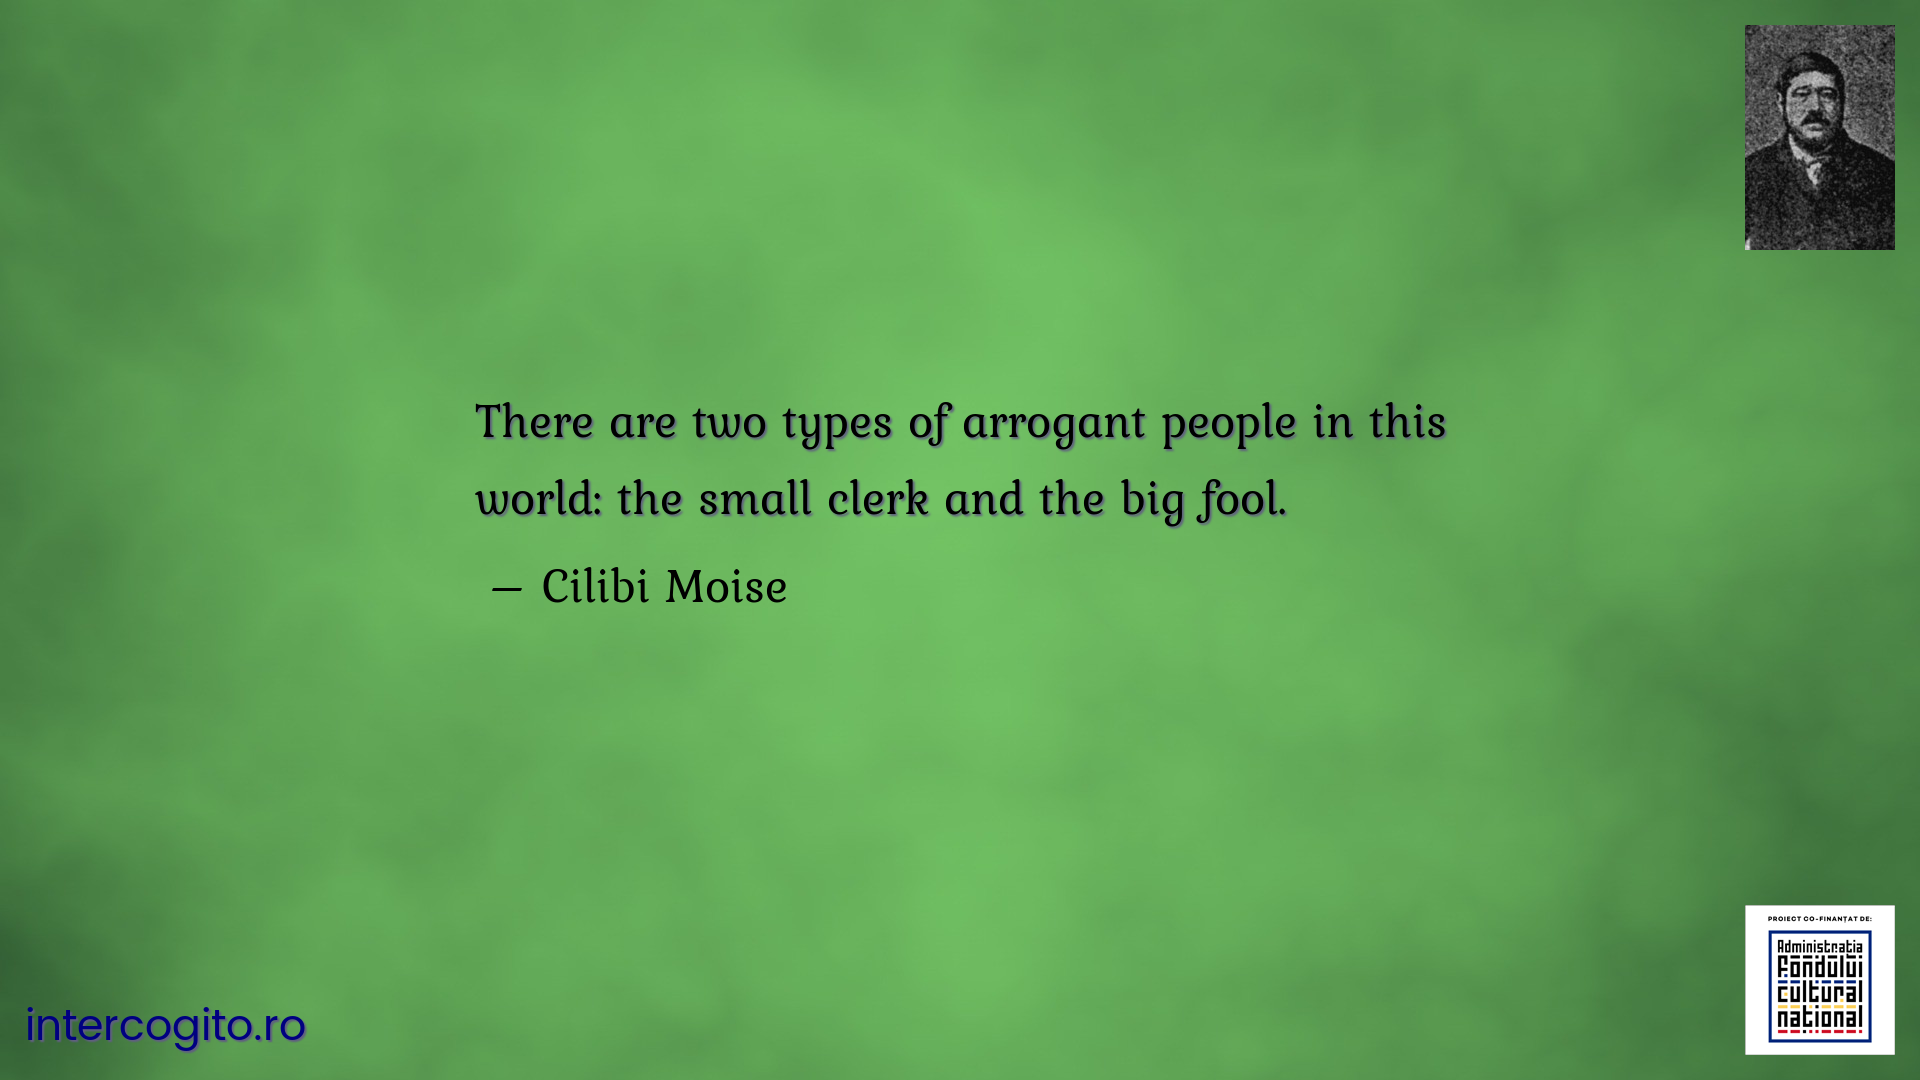 There are two types of arrogant people in this world: the small clerk and the big fool.